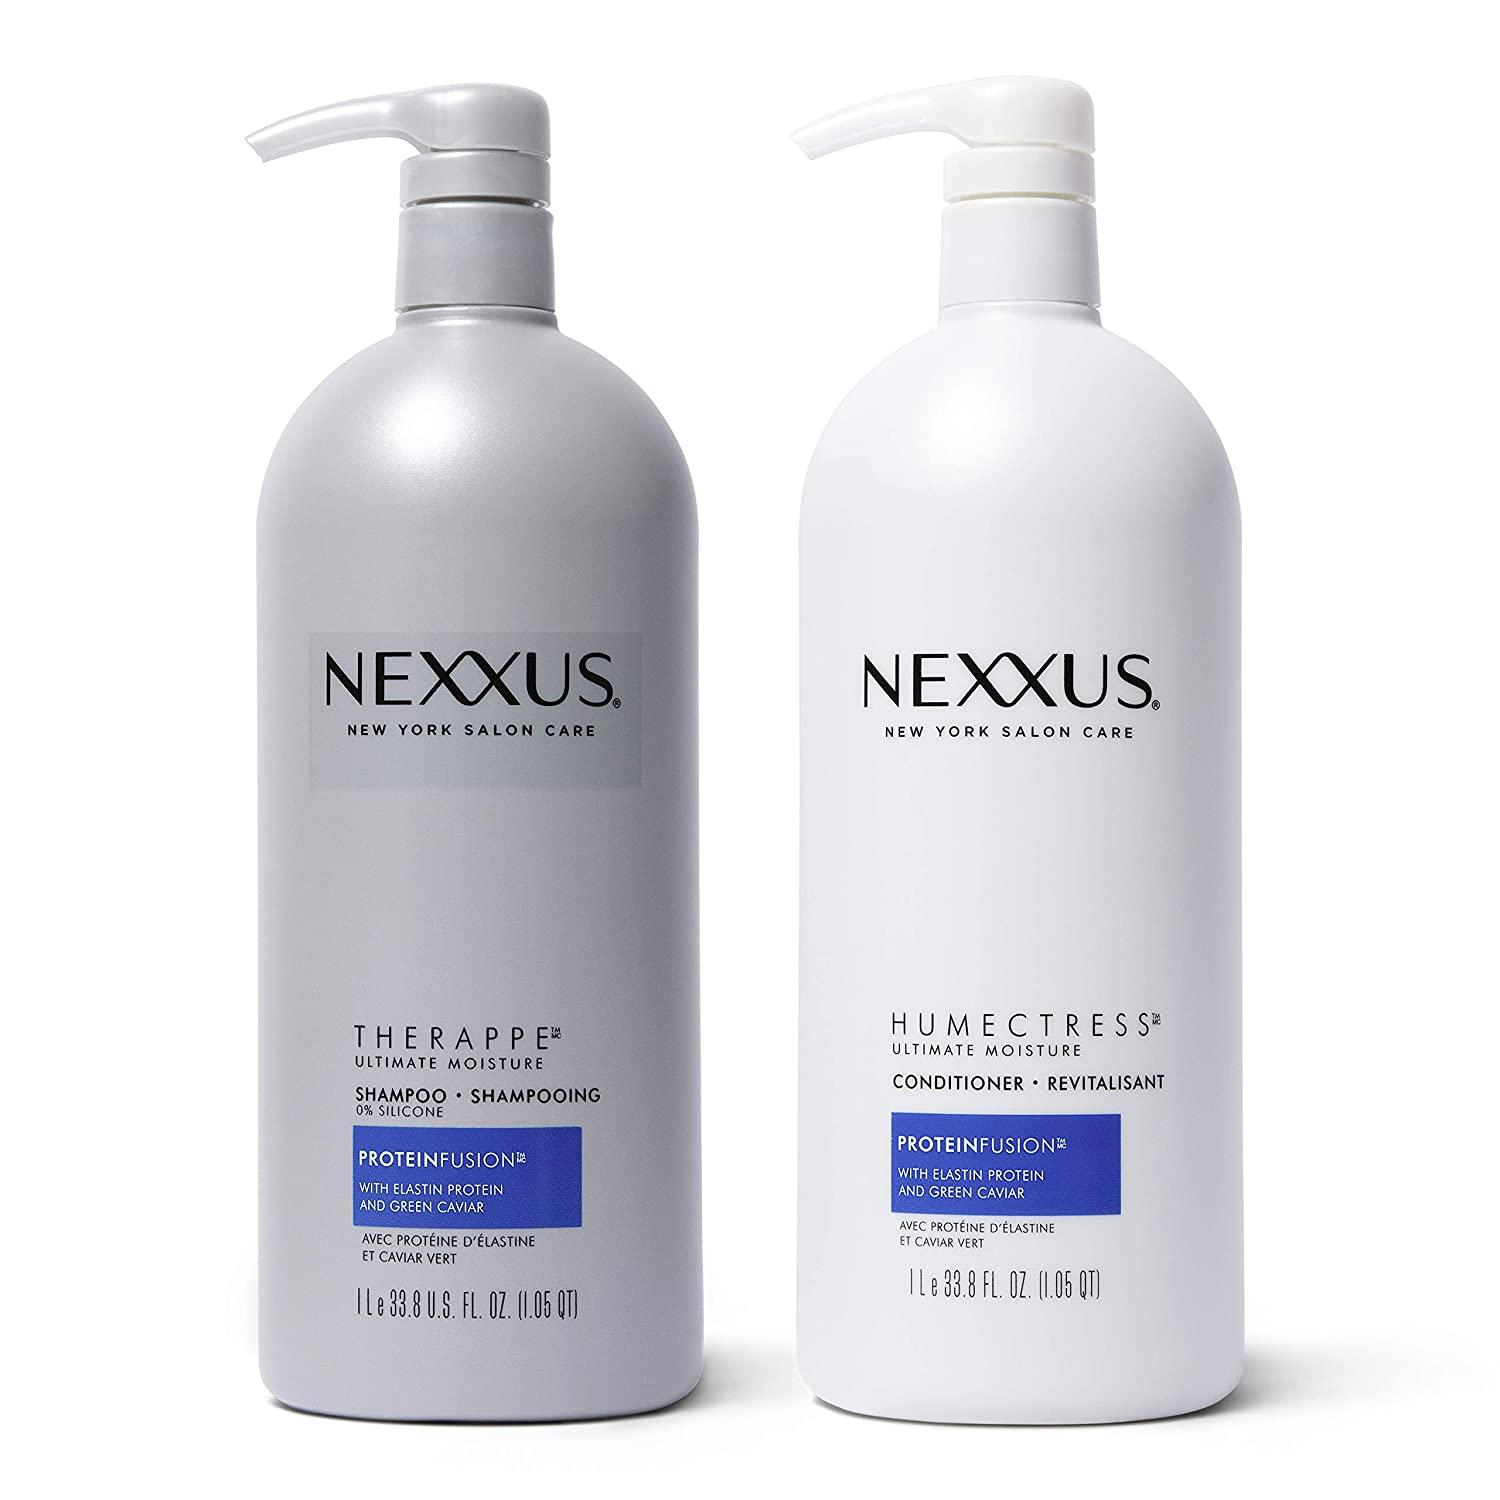 2 Nexxus Therapee Shampoo and Humectress Conditioner for $10.99 Shipped